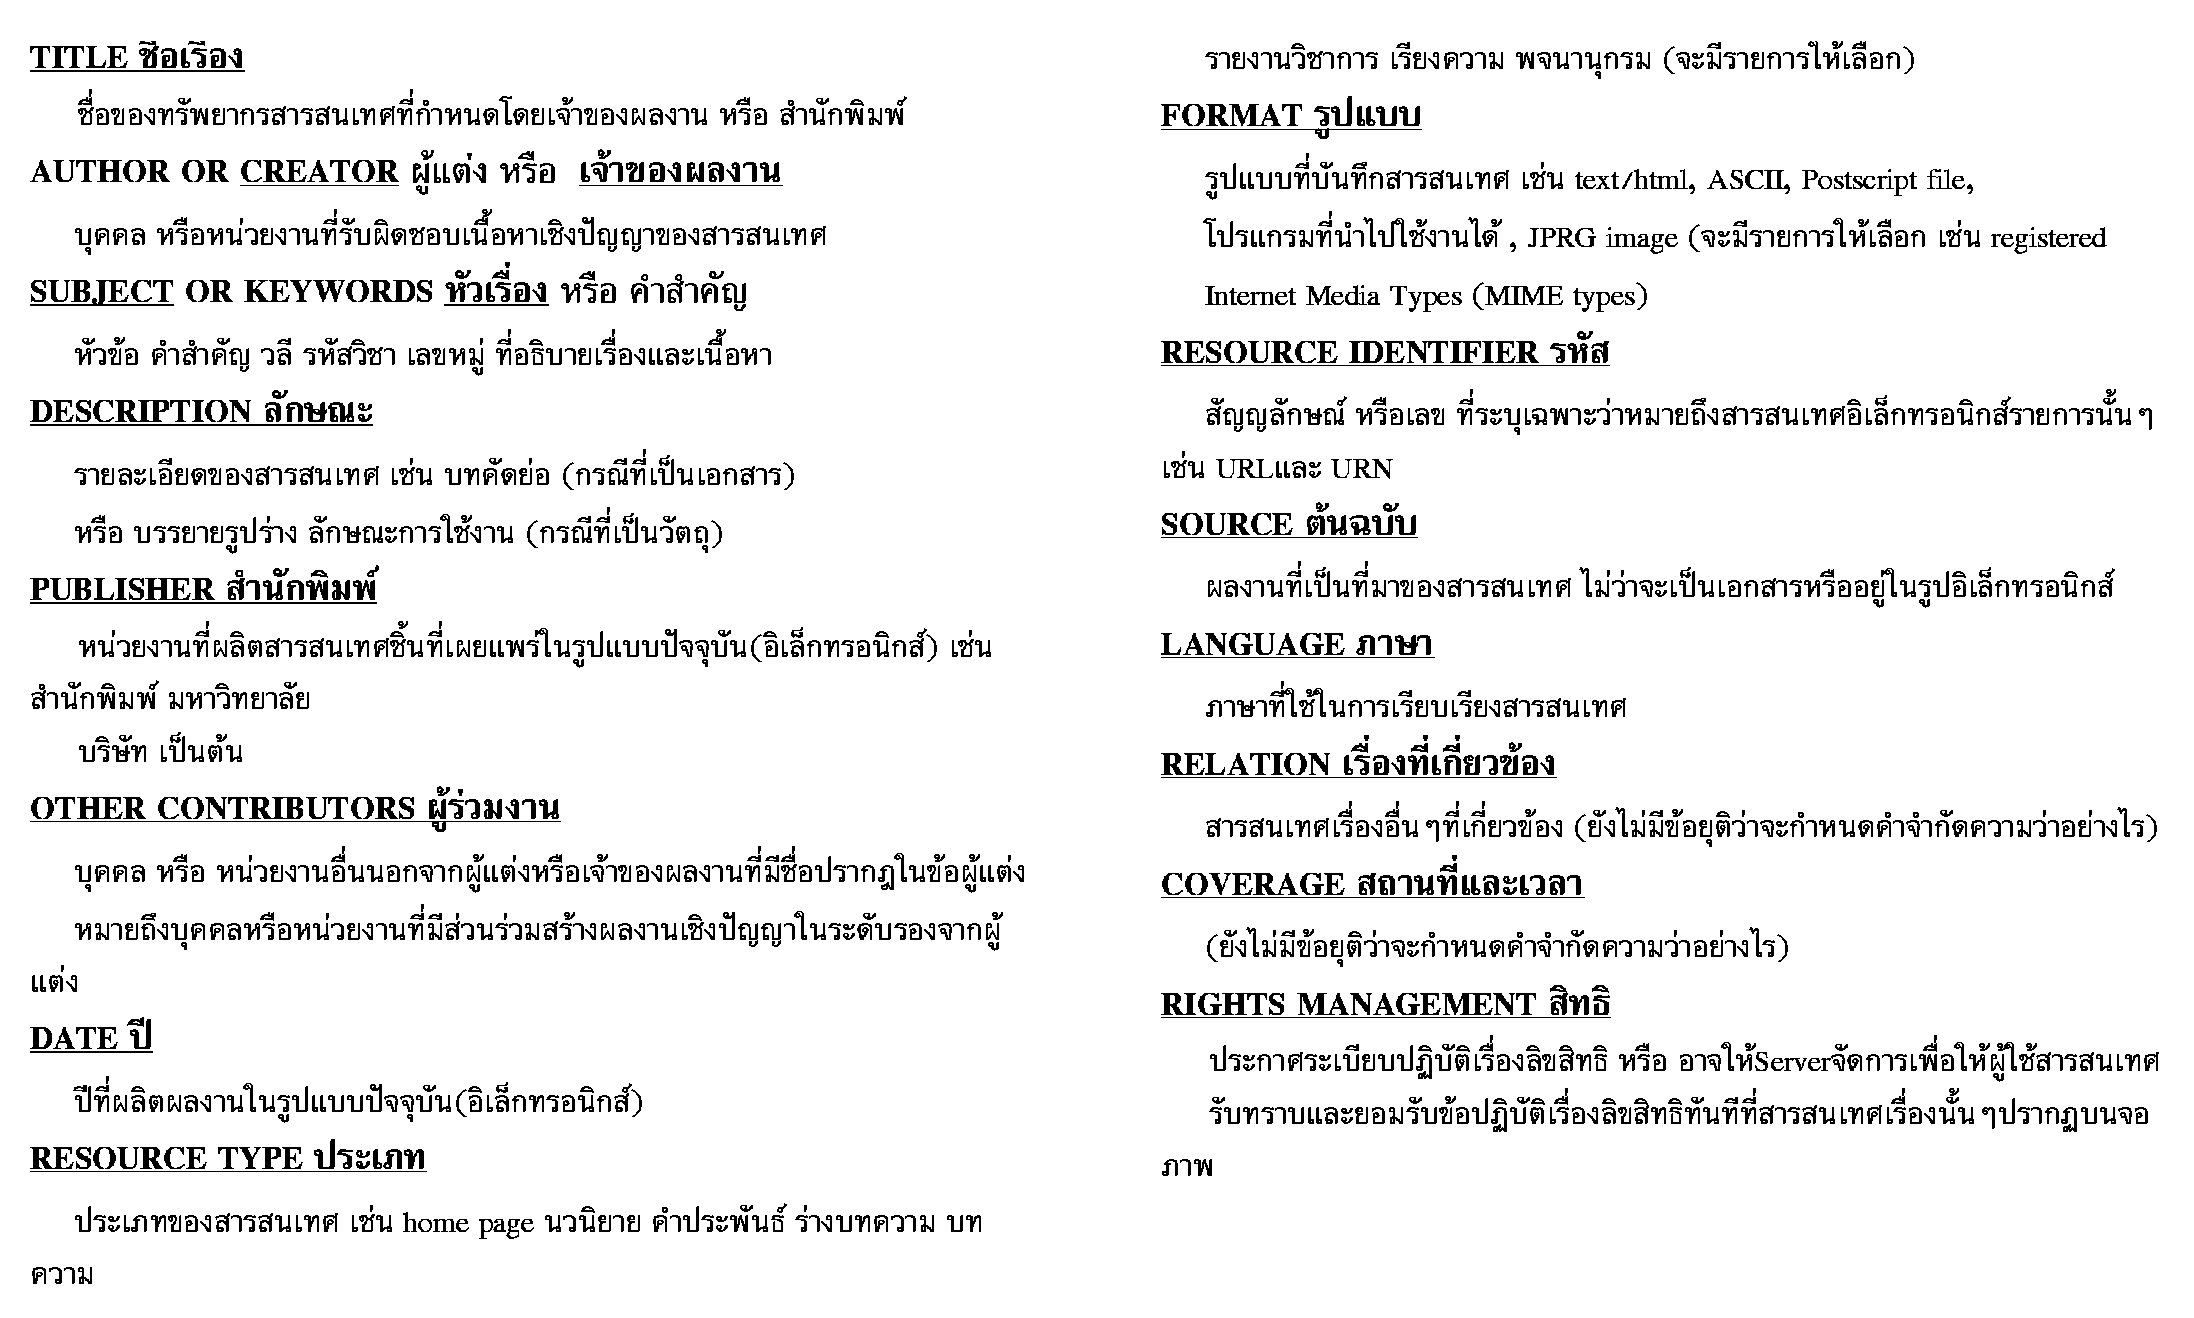 DC-Simple, defined in Thai